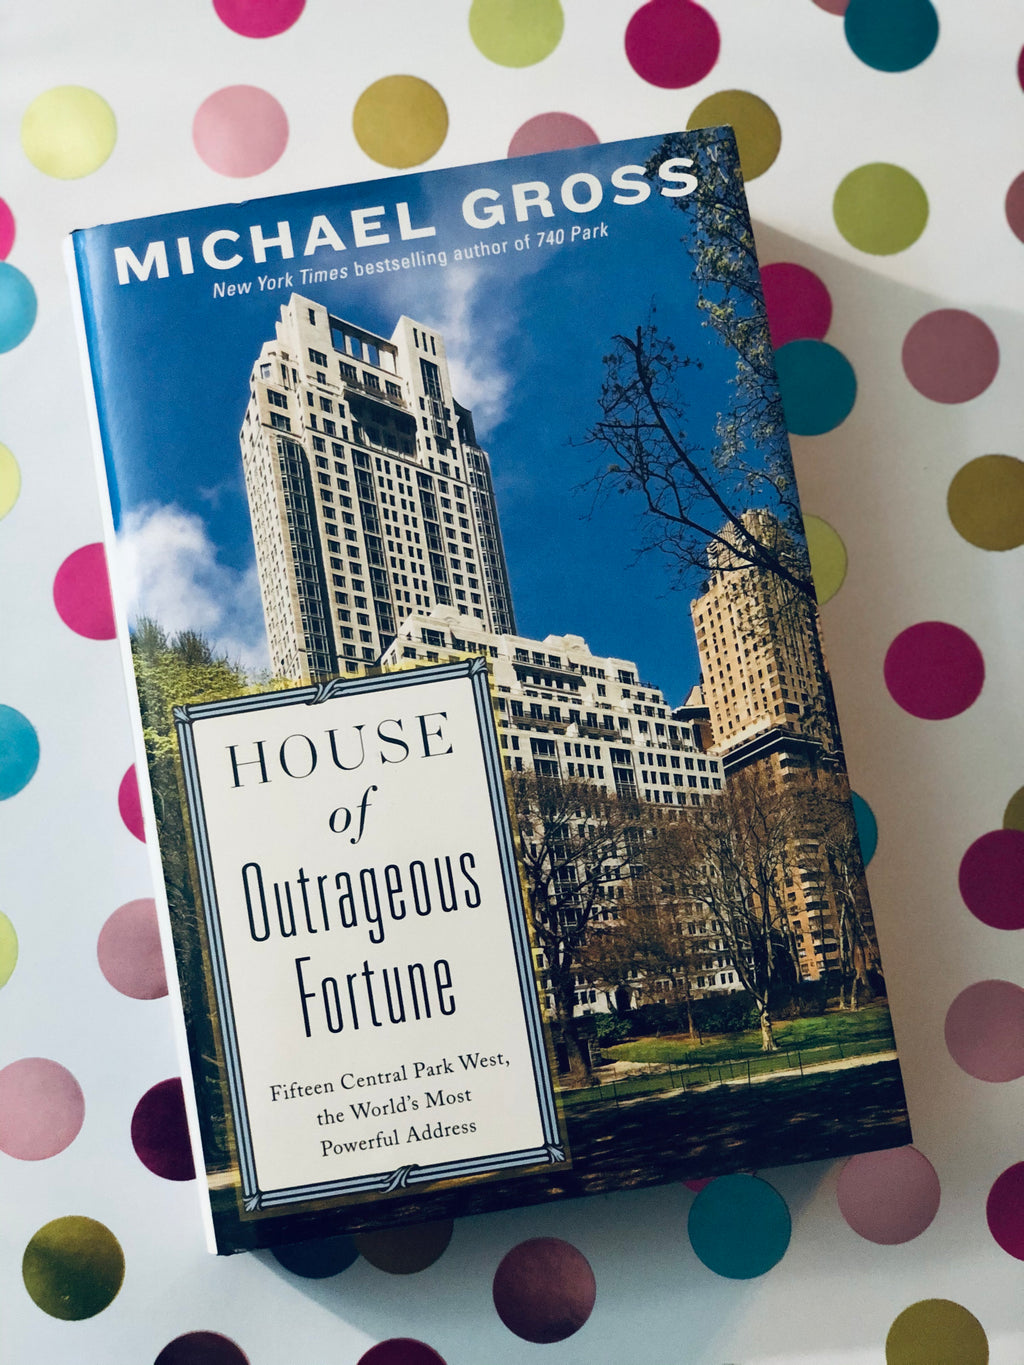 House of Outrageous Fortune- By Michael Gross